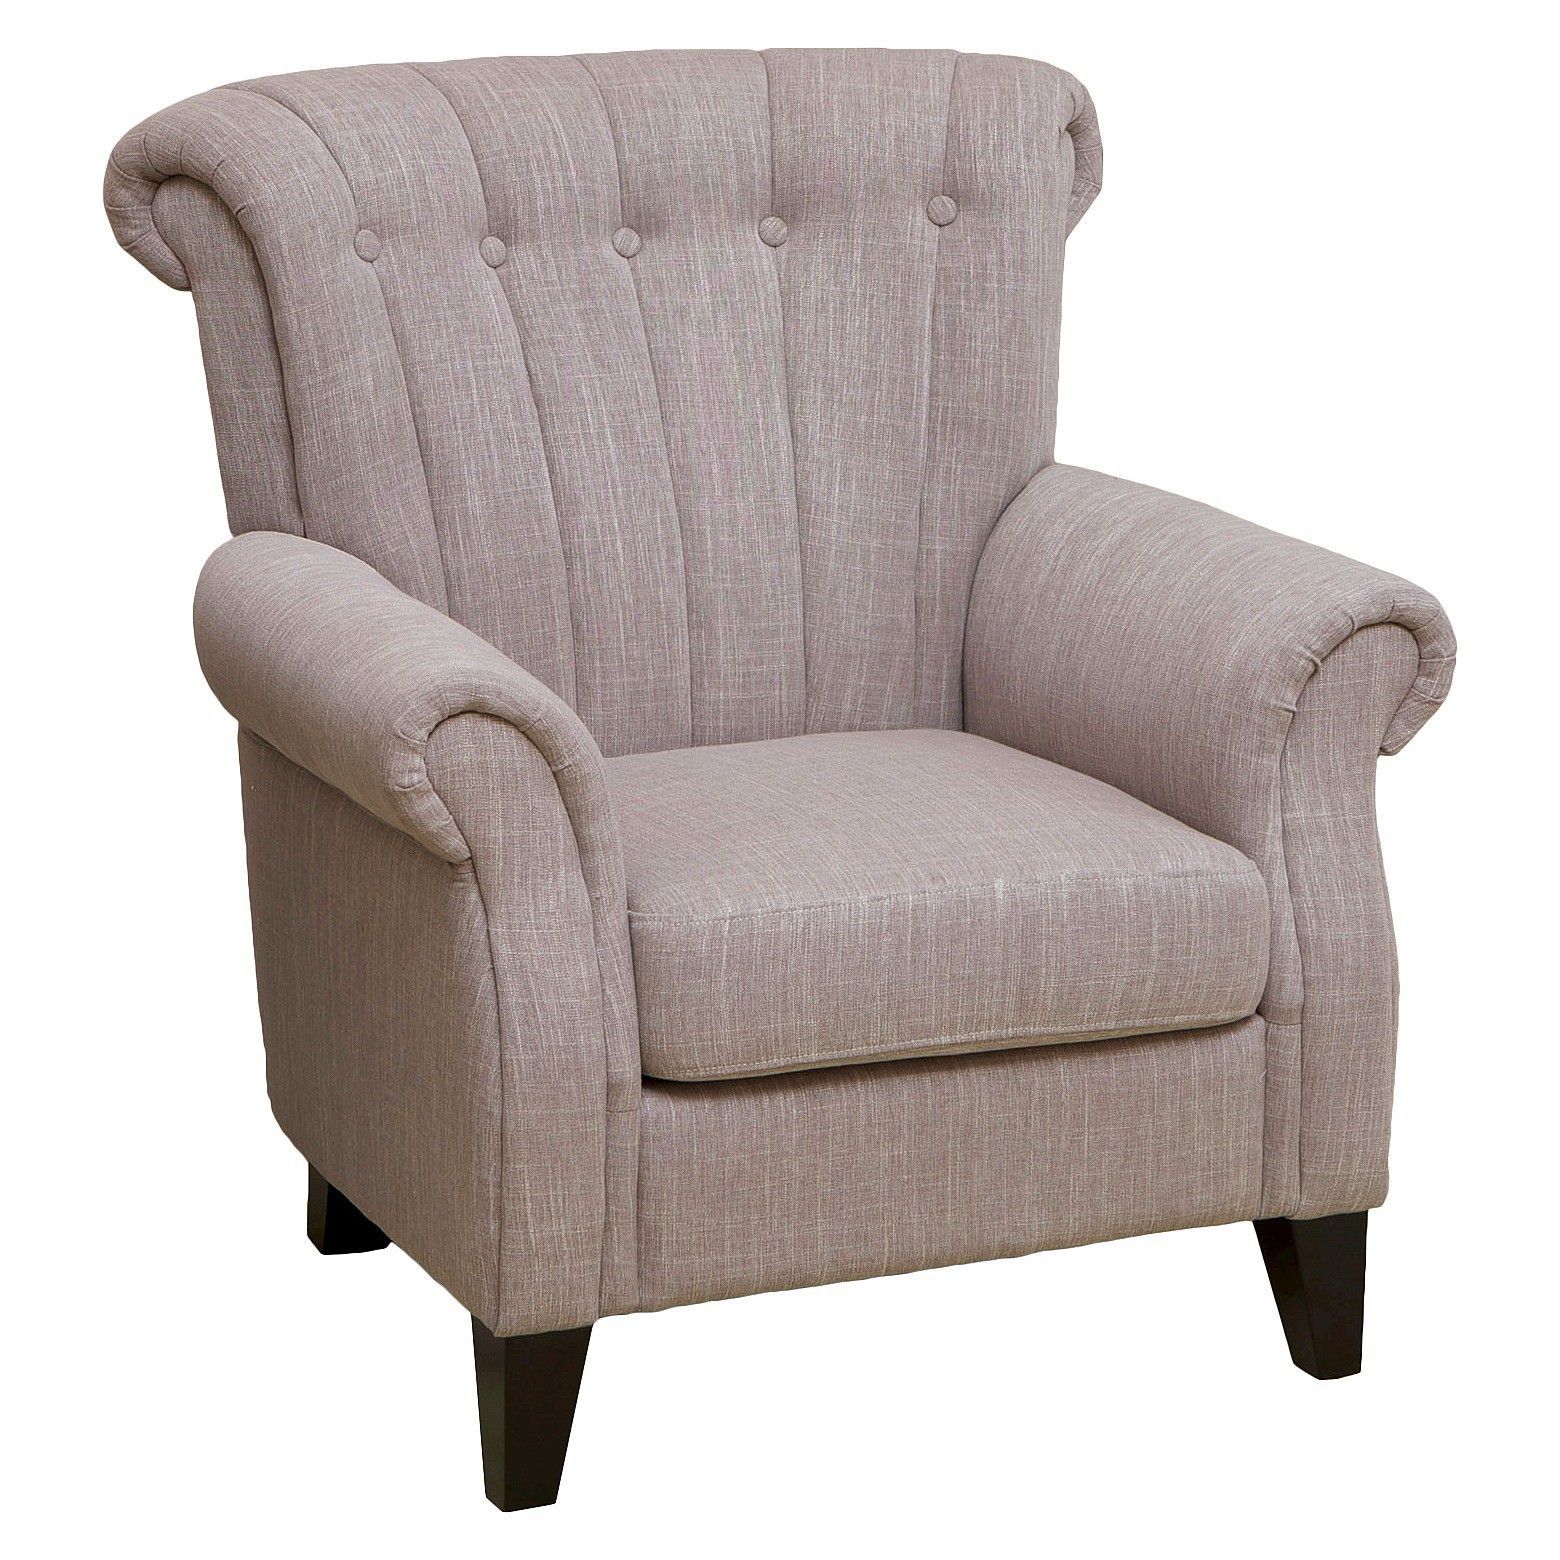 Live It Up In Style With A Christopher Knight Home Club Throughout Live It Cozy Armchairs (View 3 of 15)